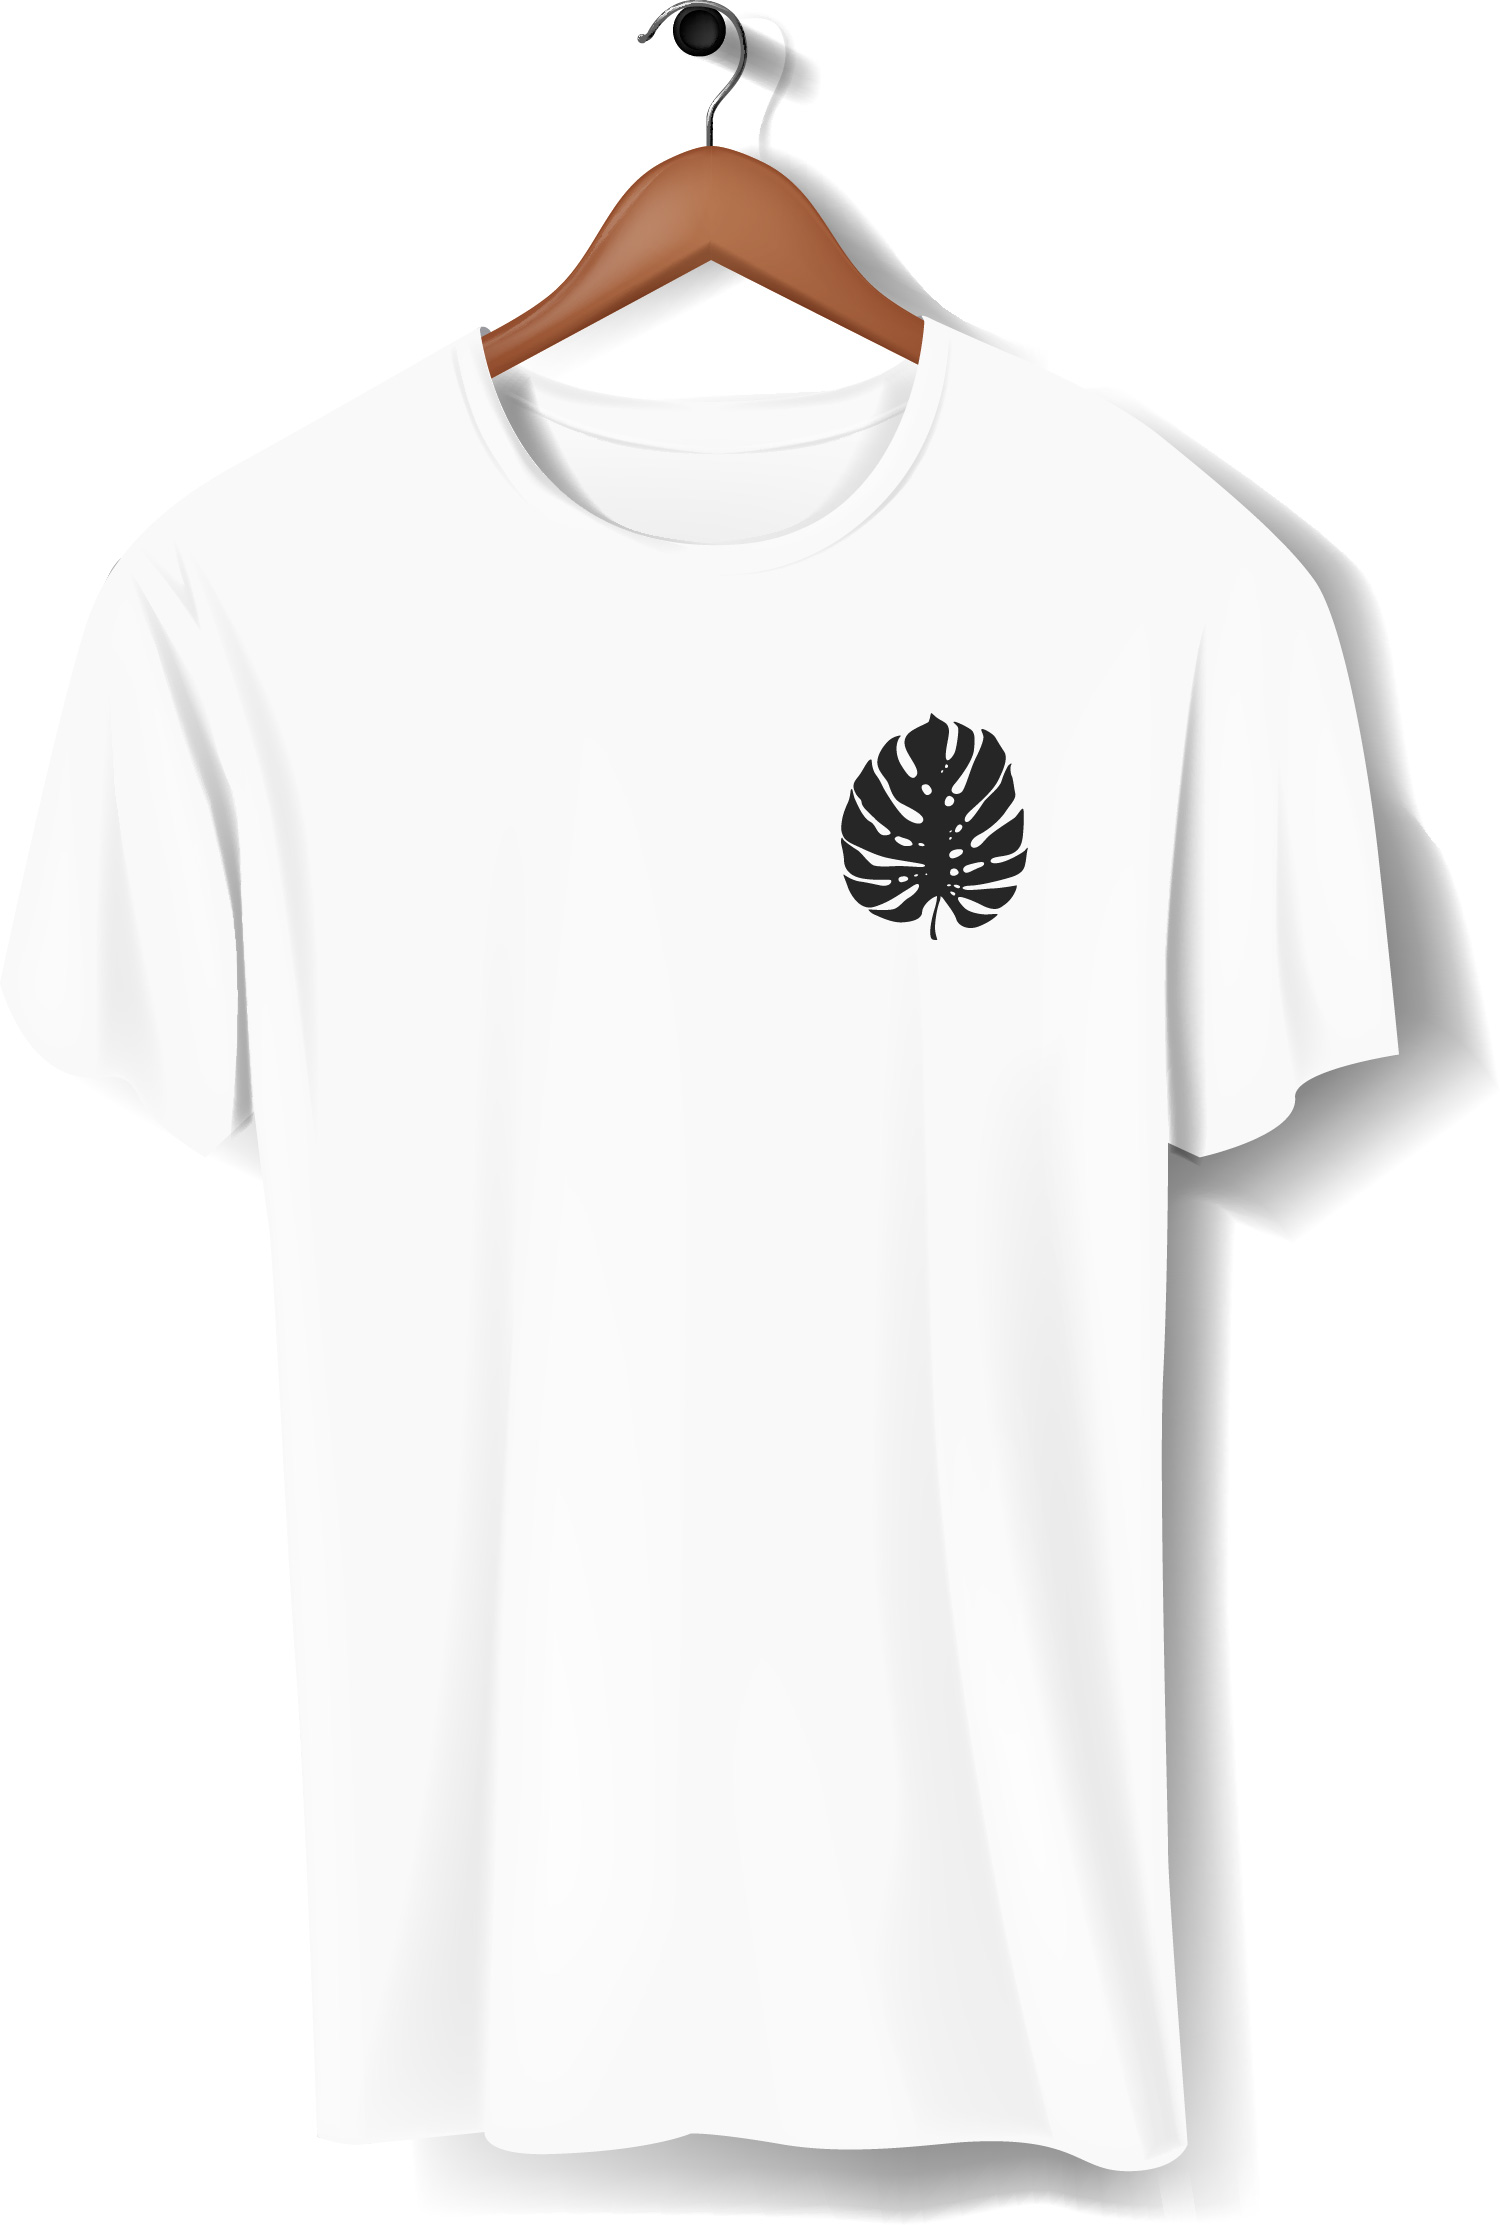 White And Black Leaf Pattern T Shirt